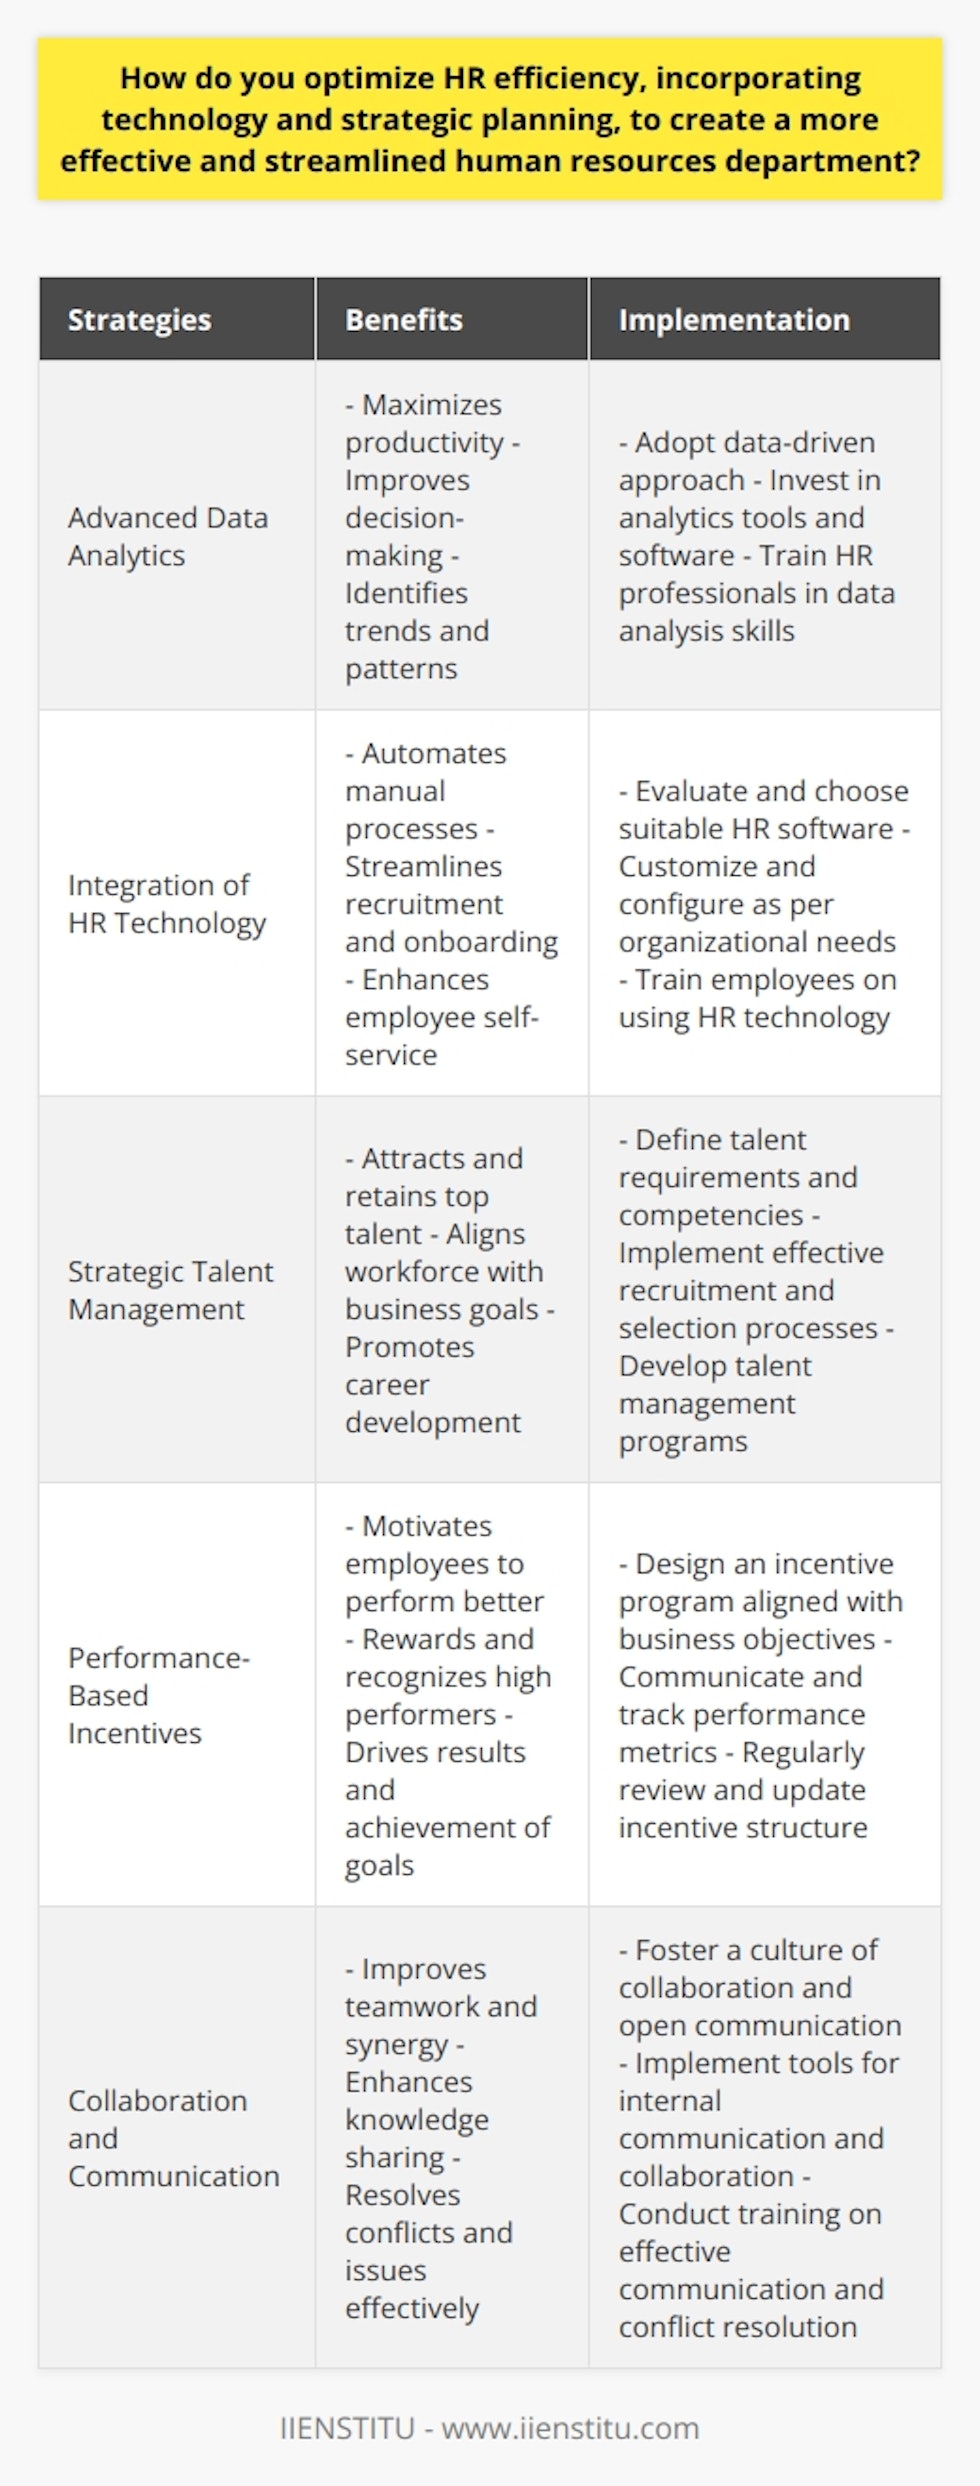 By implementing these strategies, HR professionals can maximize productivity, improve employee engagement, and contribute to the overall success of the company. The use of advanced data analytics, integration of HR technology, and strategic talent management initiatives are essential for optimizing HR efficiency. Additionally, implementing performance-based incentives and promoting collaboration and communication within the HR department can further enhance its effectiveness. By following these practices, organizations can create a more streamlined and effective human resources department that aligns with the goals of the company.